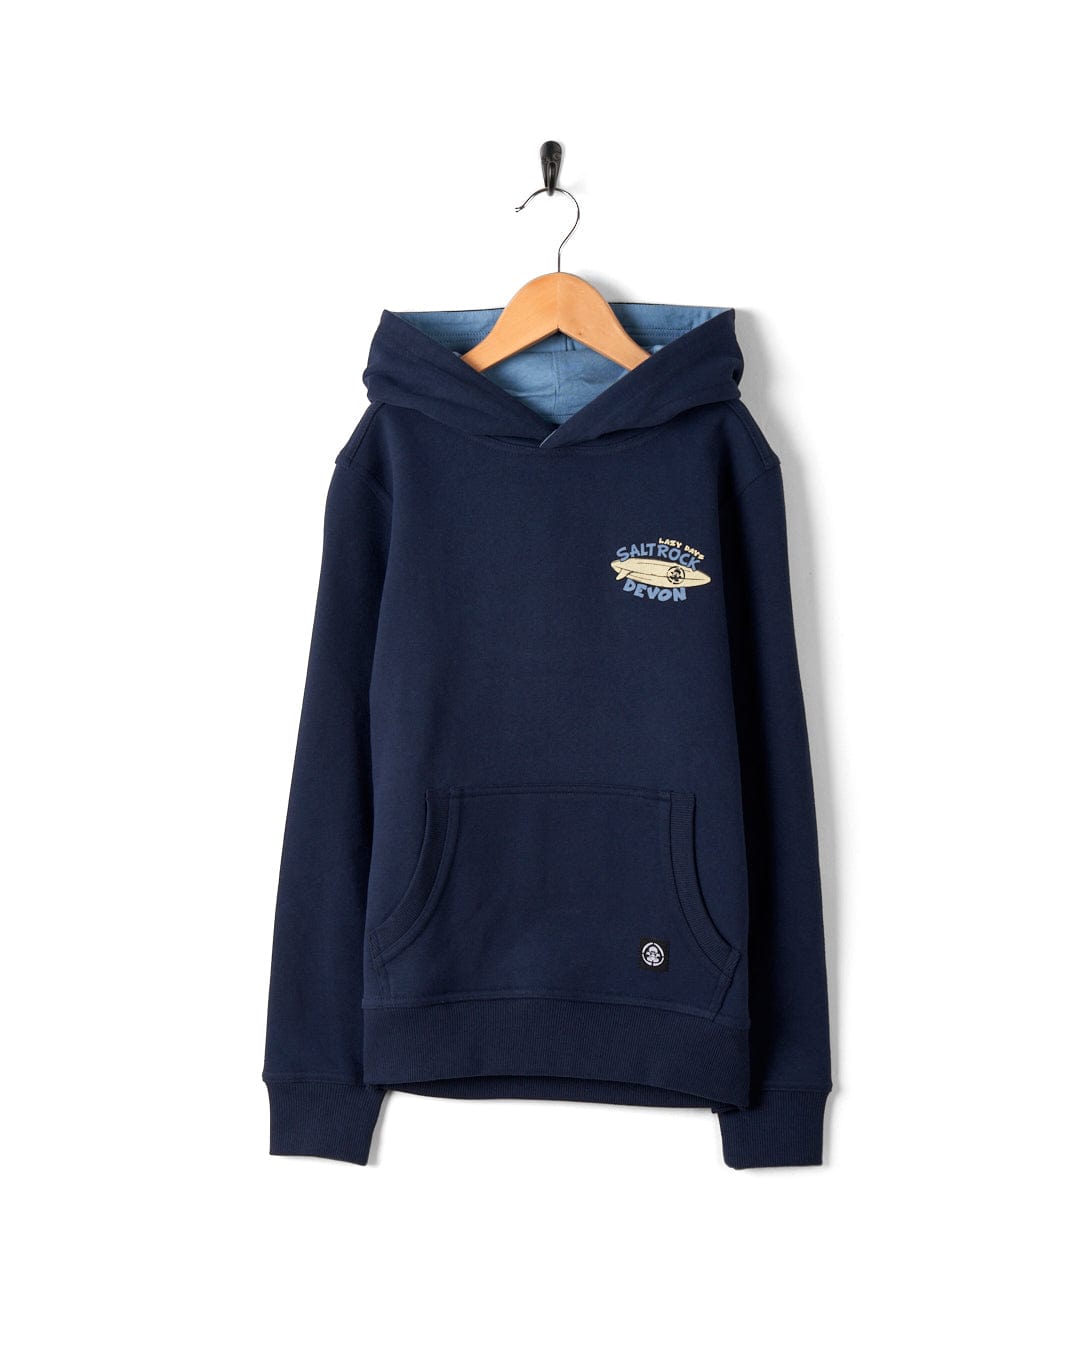 Lazy Location Devon - Recycled Kids Hoodie - Blue by Saltrock hanging on a wooden hanger against a white background, featuring a small Saltrock branded logo on the left chest and a front pouch.